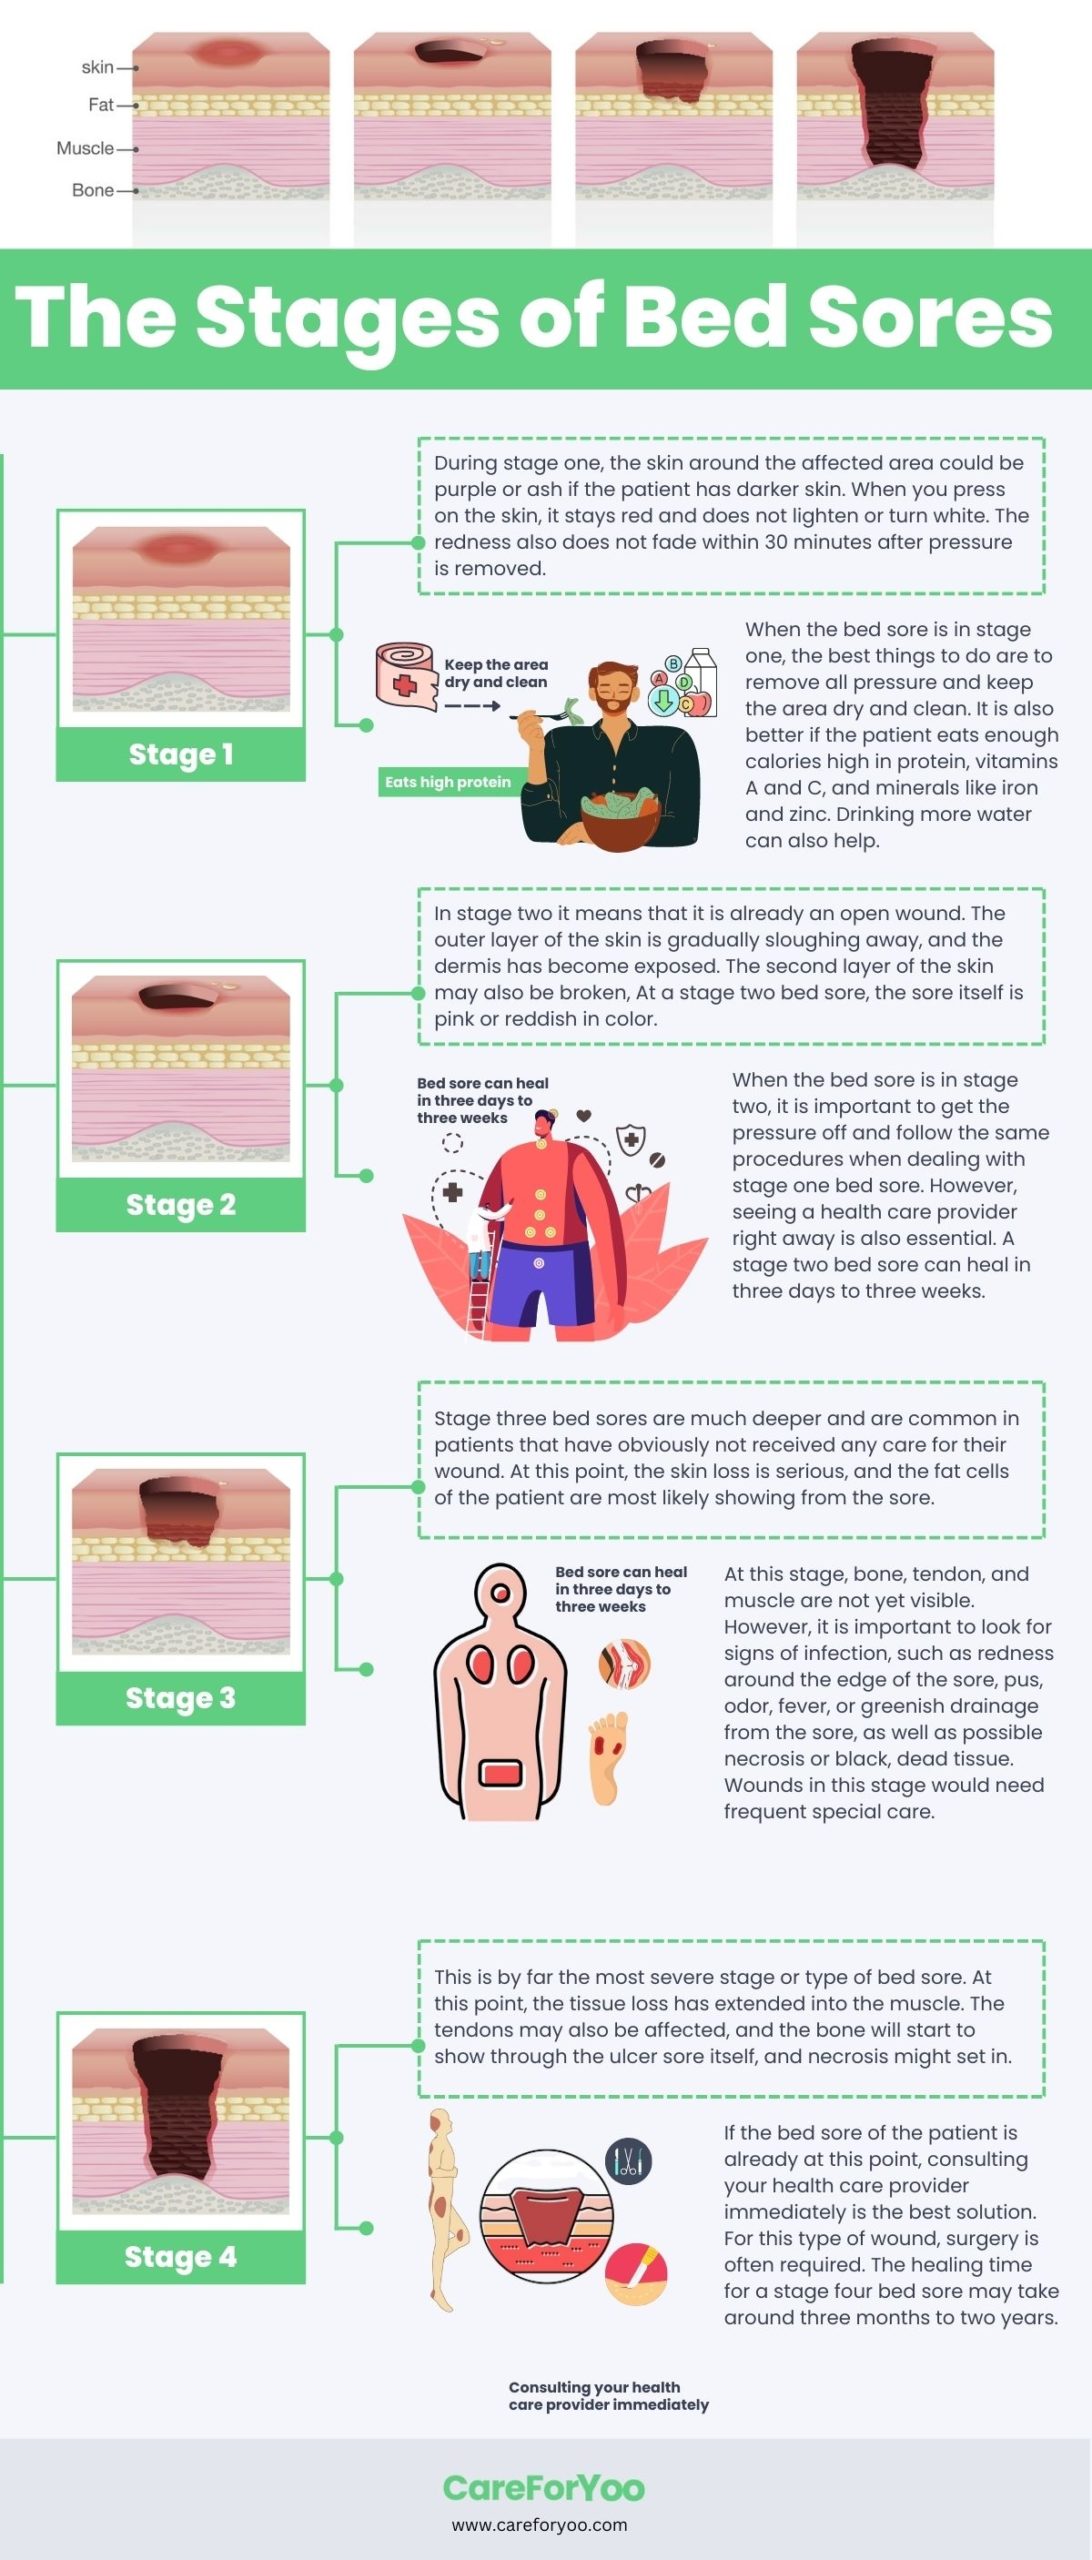 An illustrated sheet explaining the different stages of bedsores and how to care for them